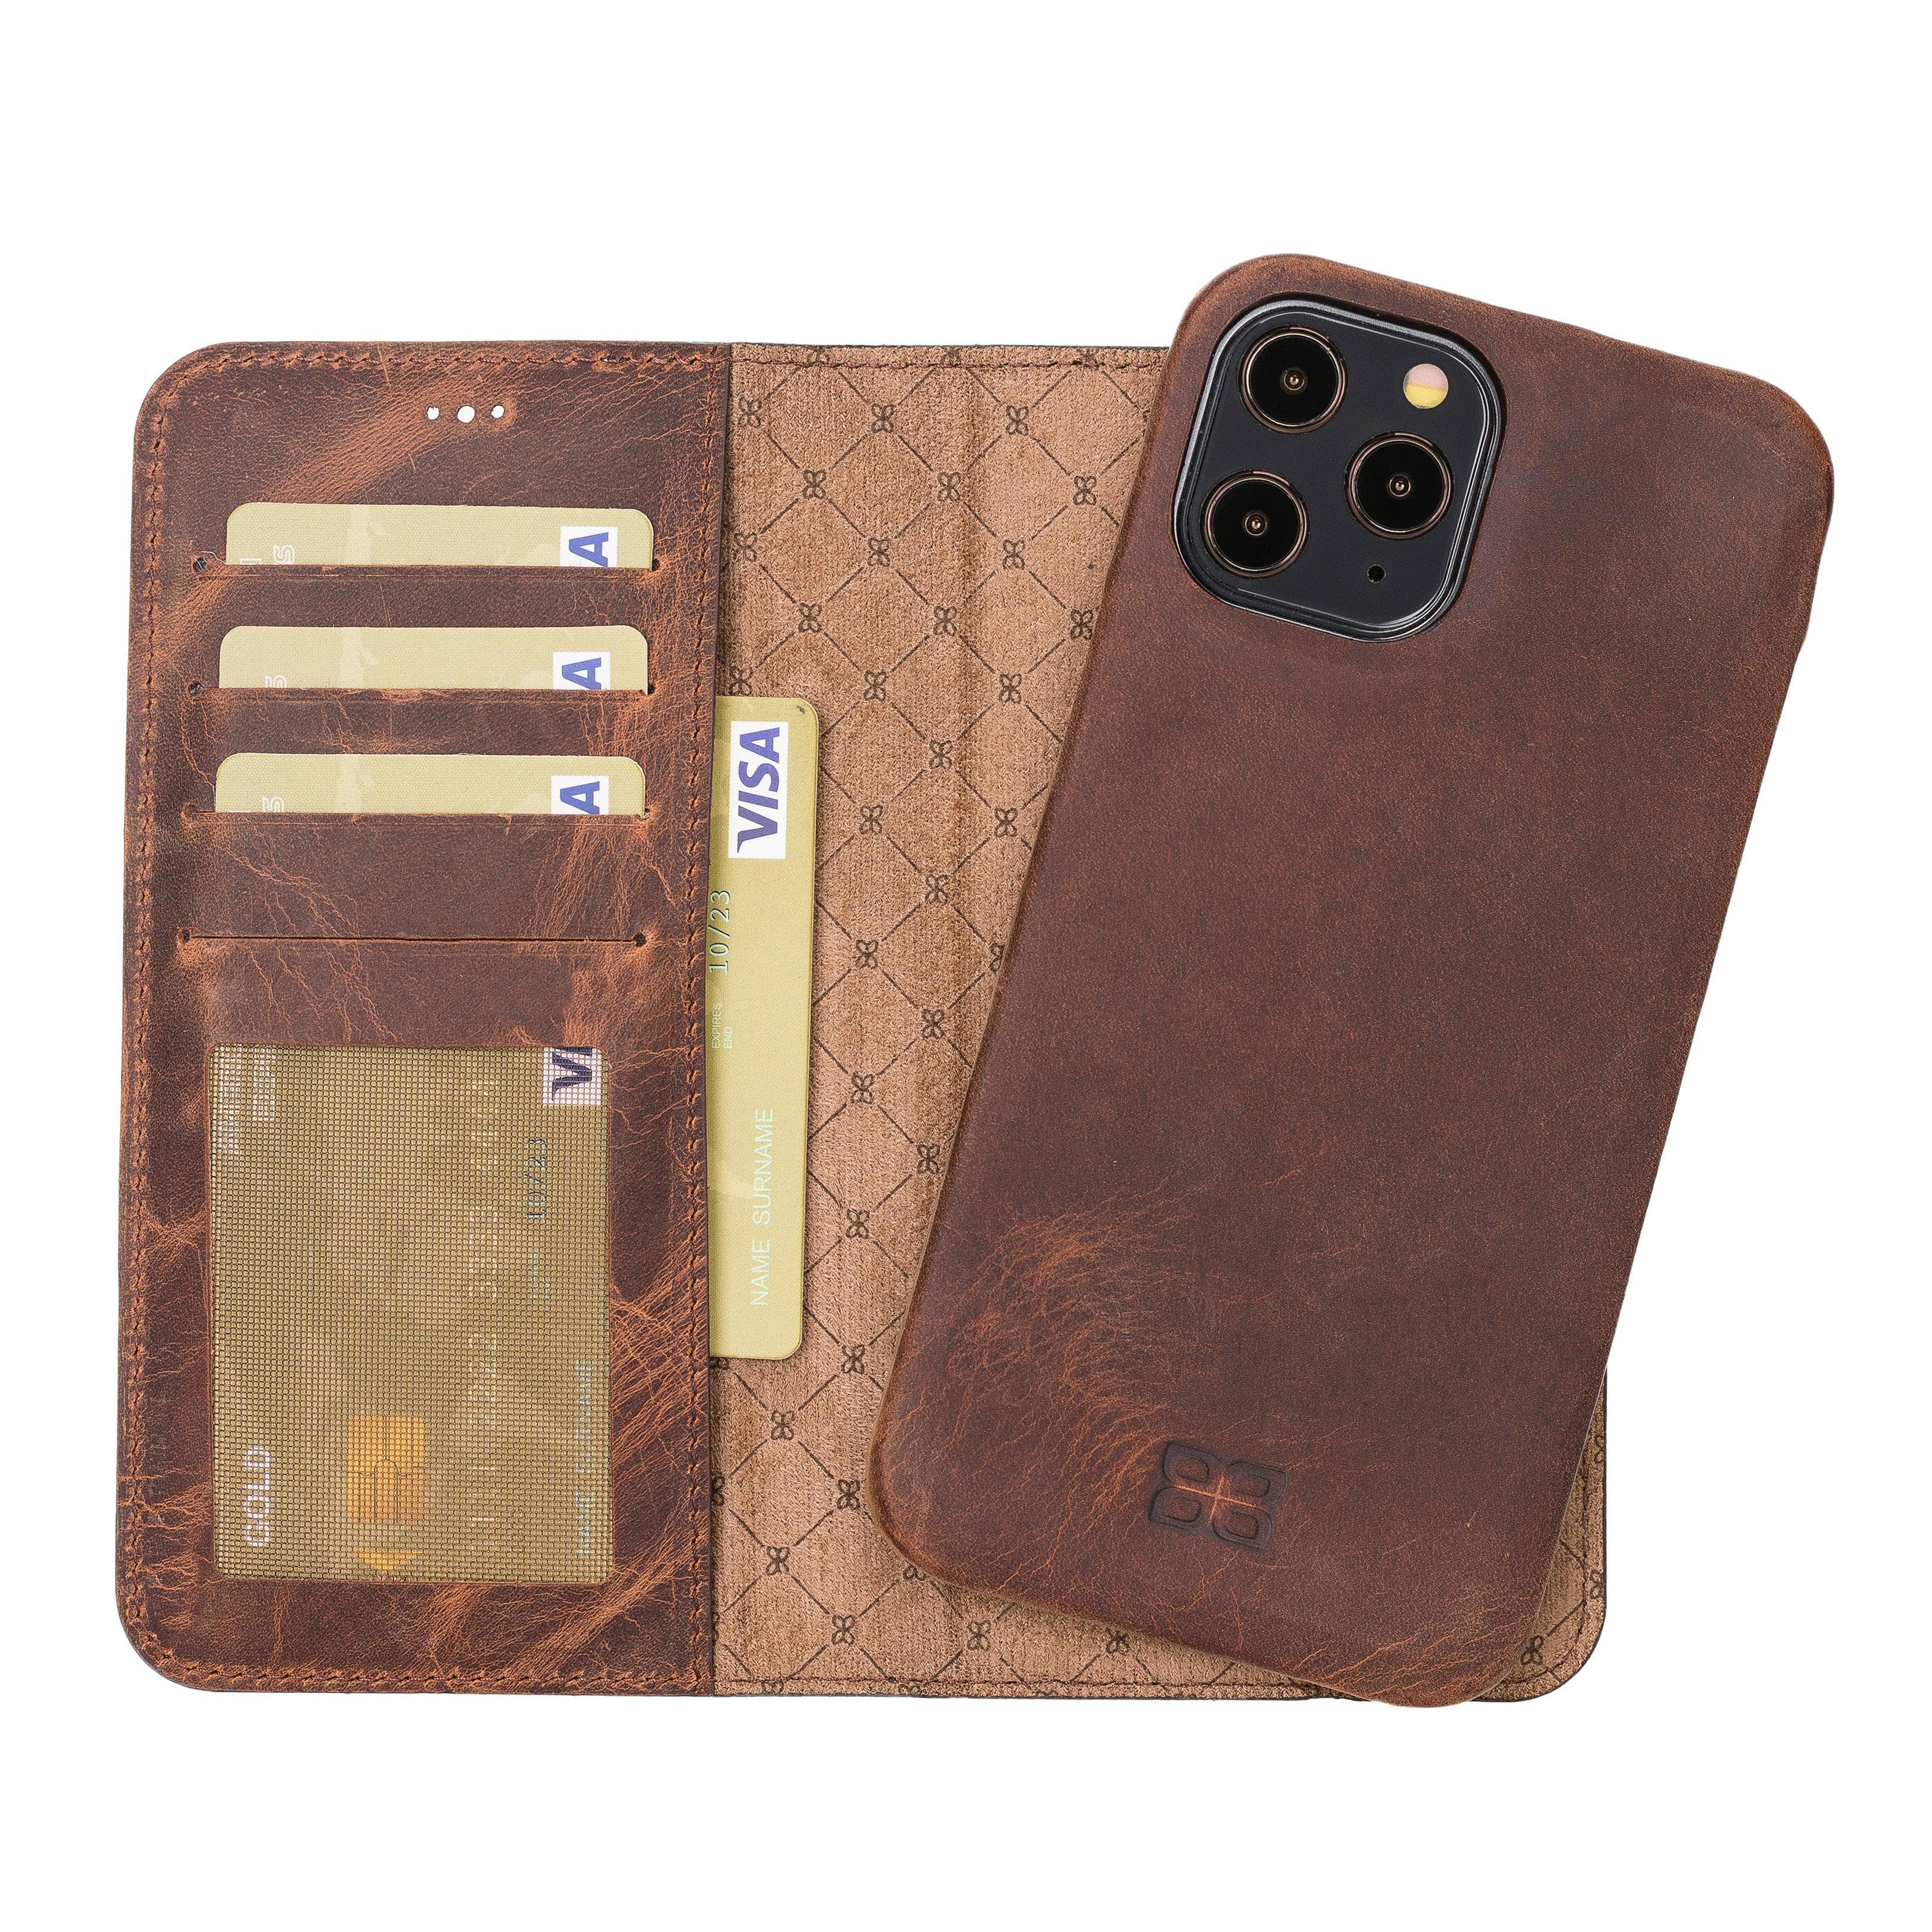 F360 Magnetic Detachable Leather Wallet Cases for Apple iPhone 12 Series iPhone 12 Promax / Dark Brown Bouletta LTD